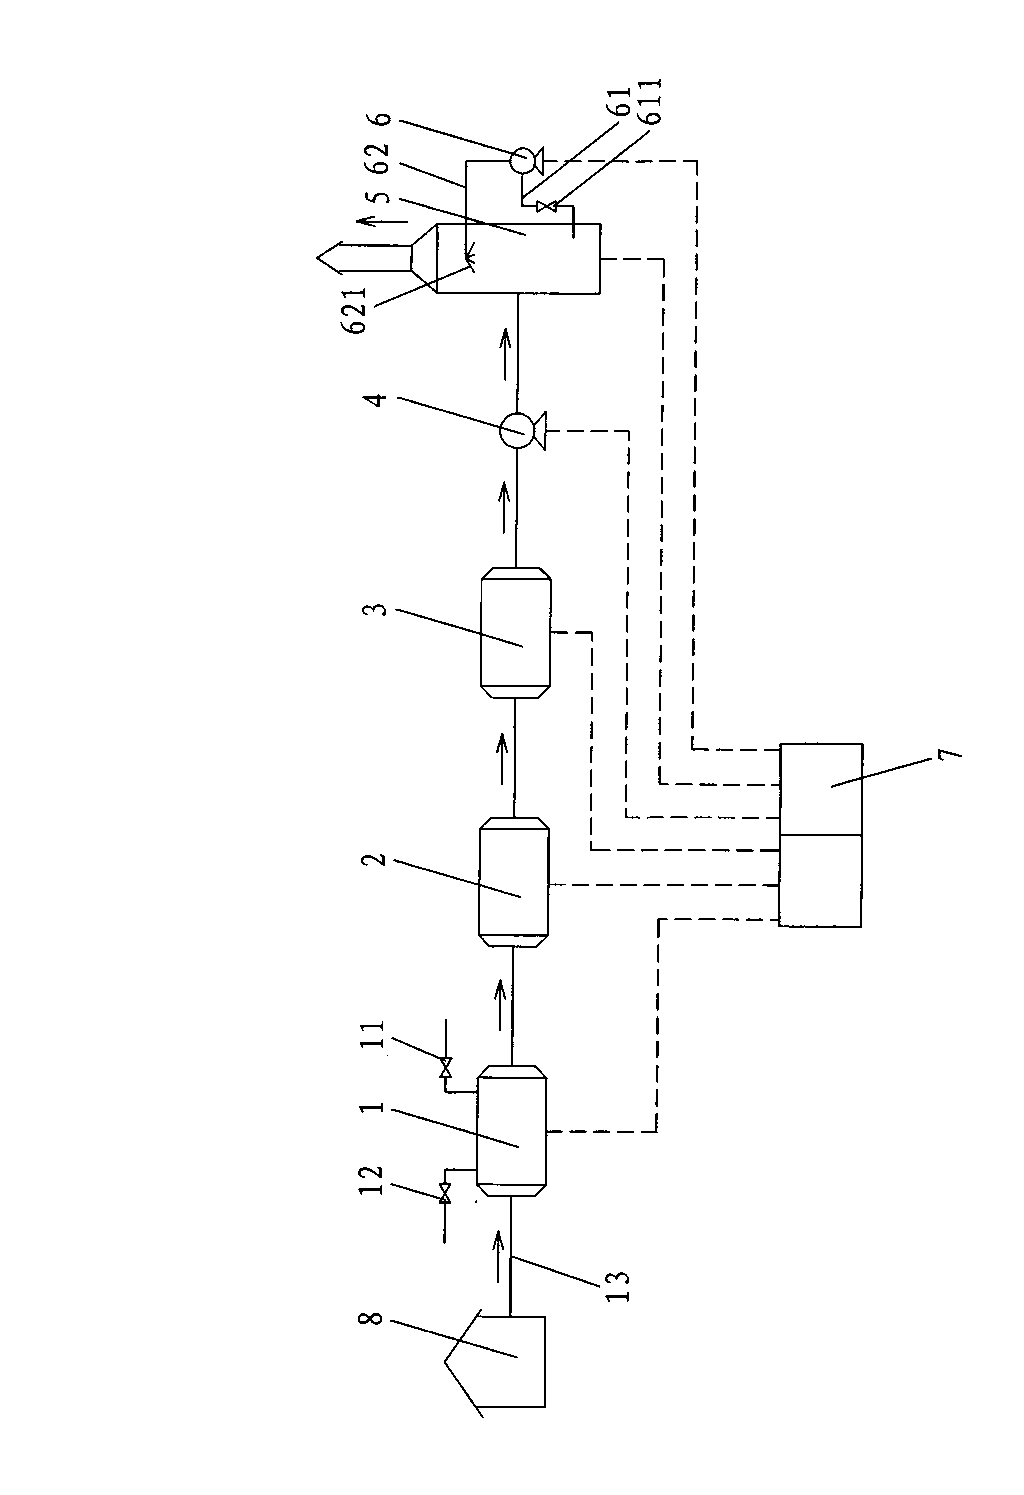 Waste gas treatment device